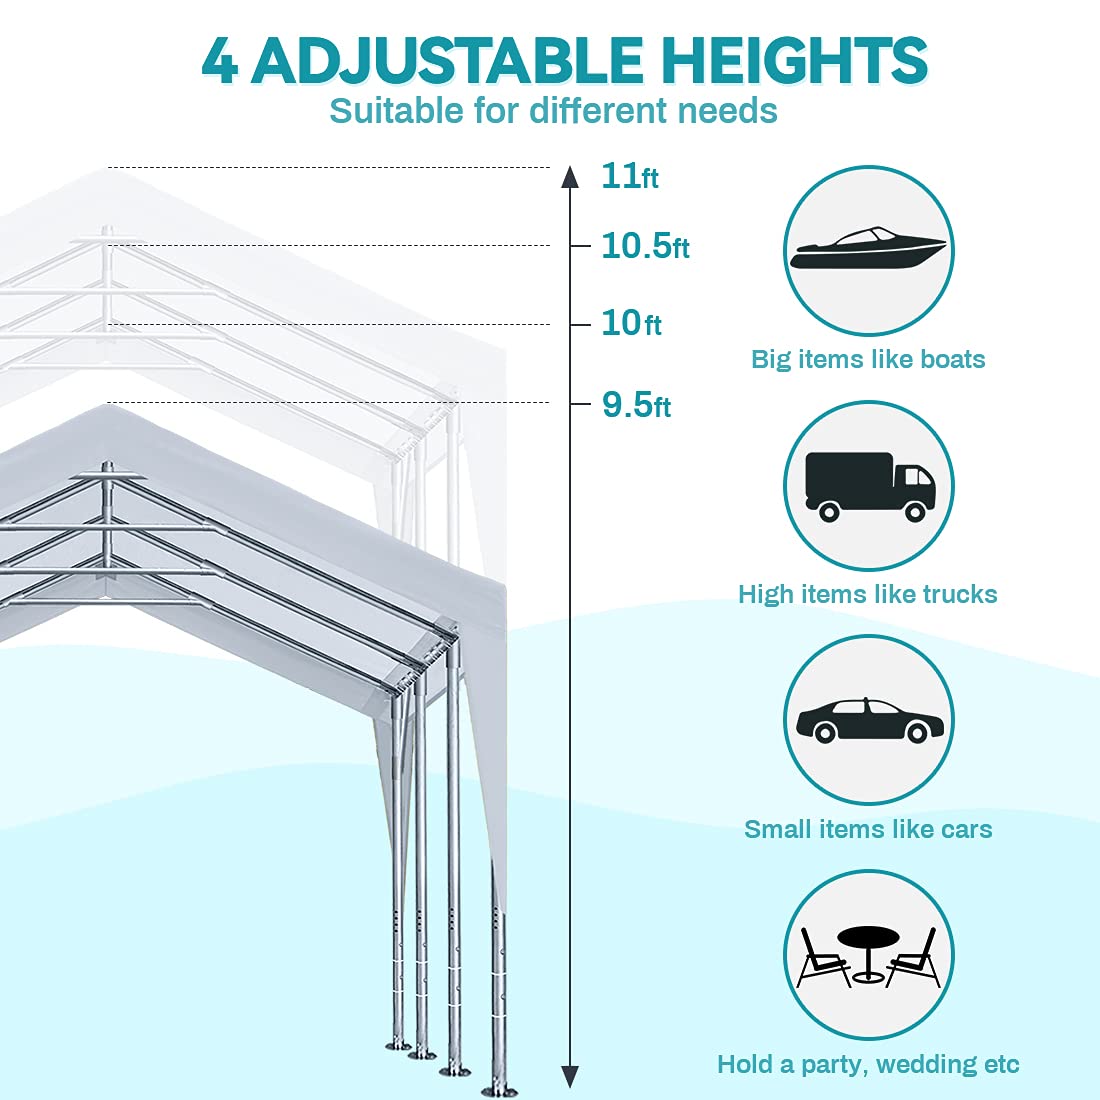 ADVANCE OUTDOOR 12x20 ft Heavy Duty Carport with Sidewalls and Doors, Adjustable Height from 9.5 to 11 ft, Car Canopy Garage Party Tent Boat Shelter 8 Reinforced Poles 4 Sandbags, White (017W-2) With Sidewall